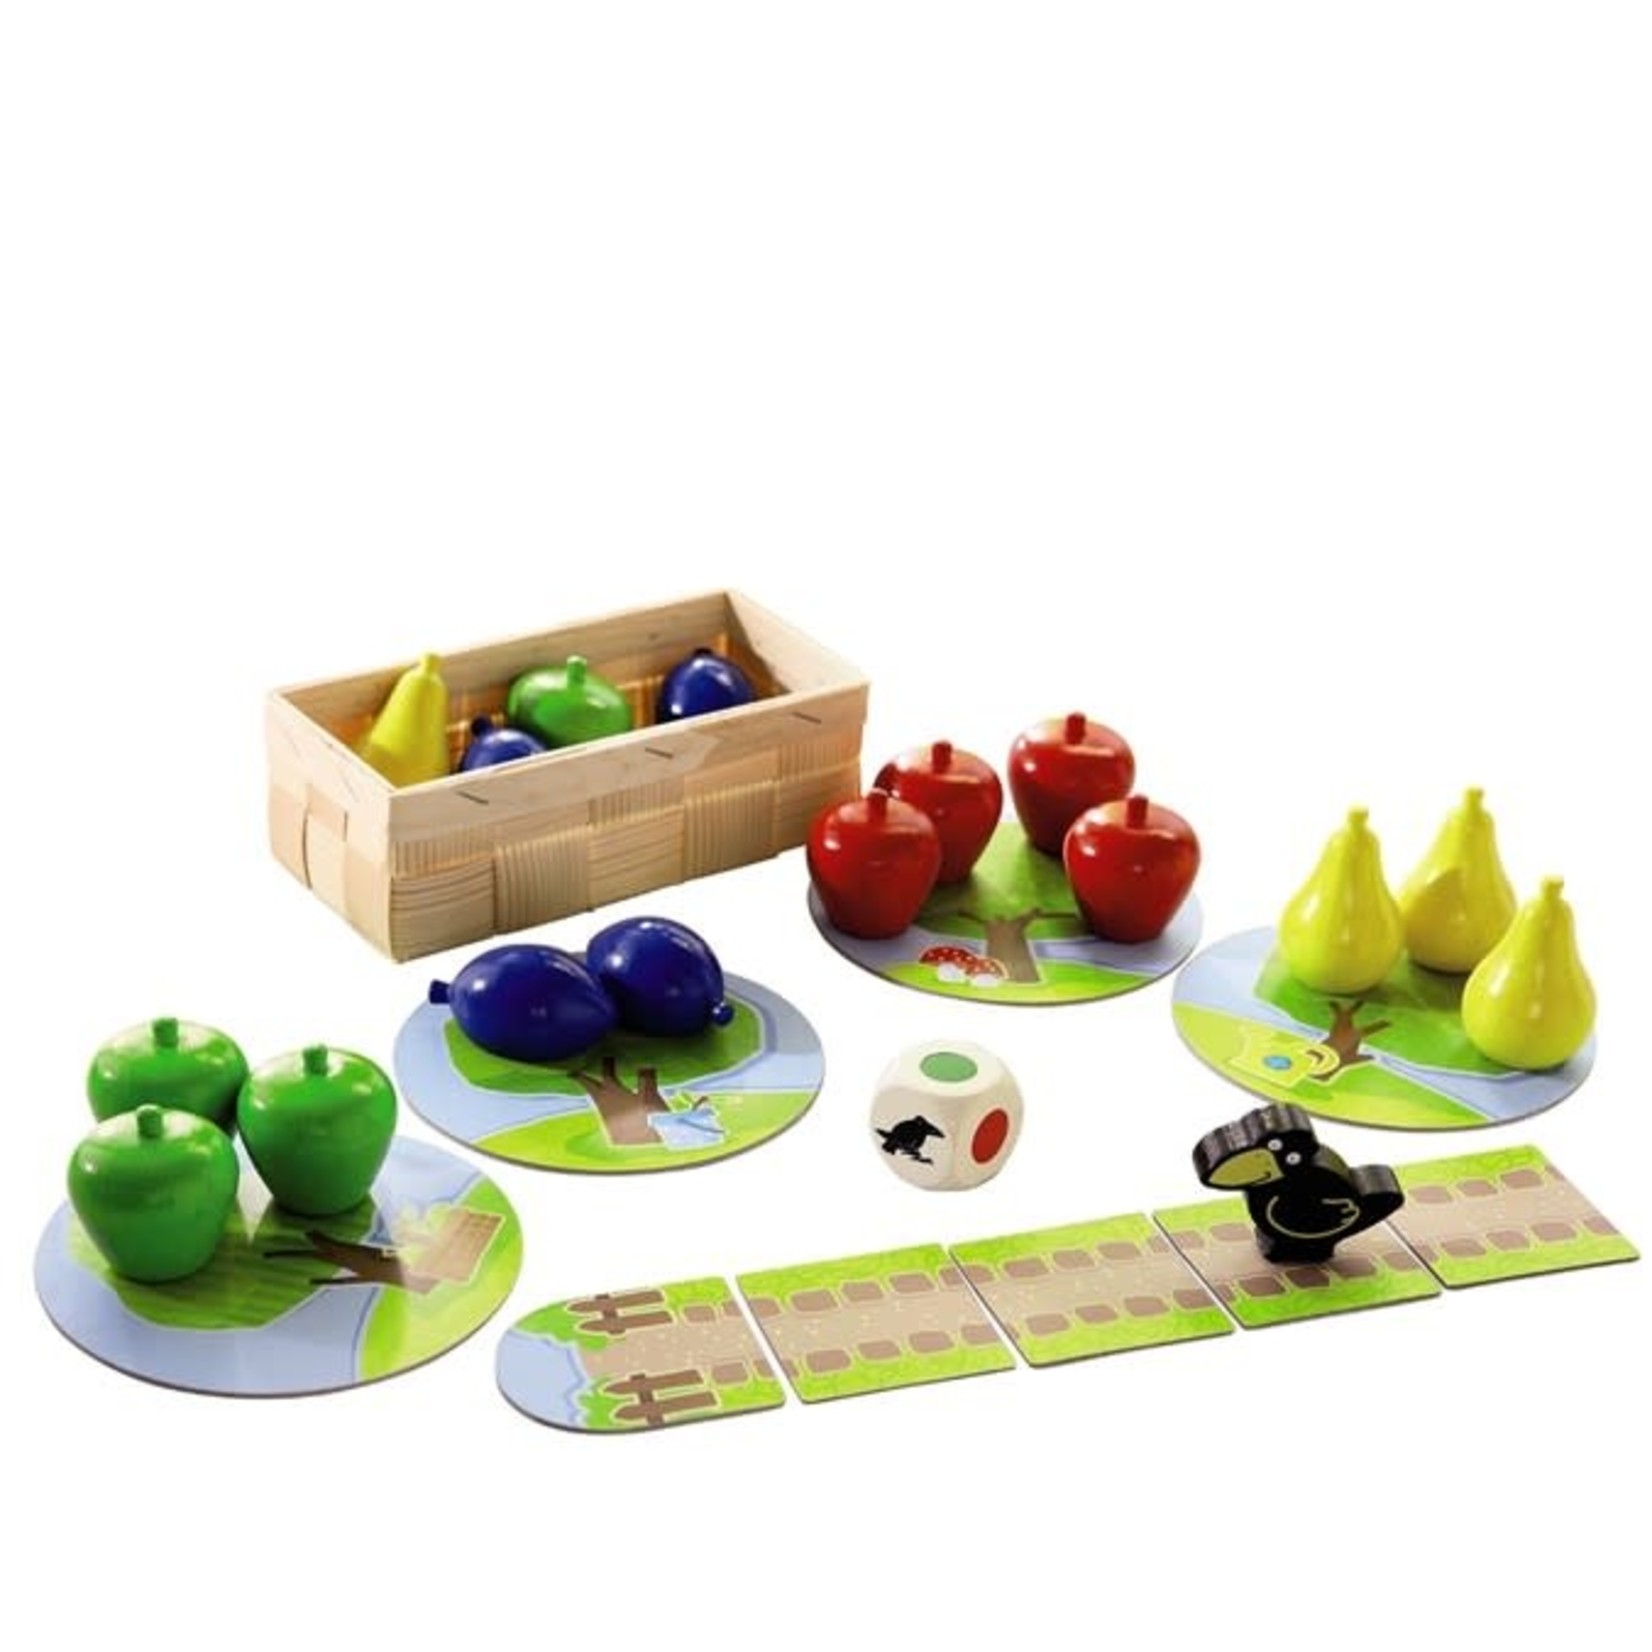 HABA My Very First Games: First Orchard